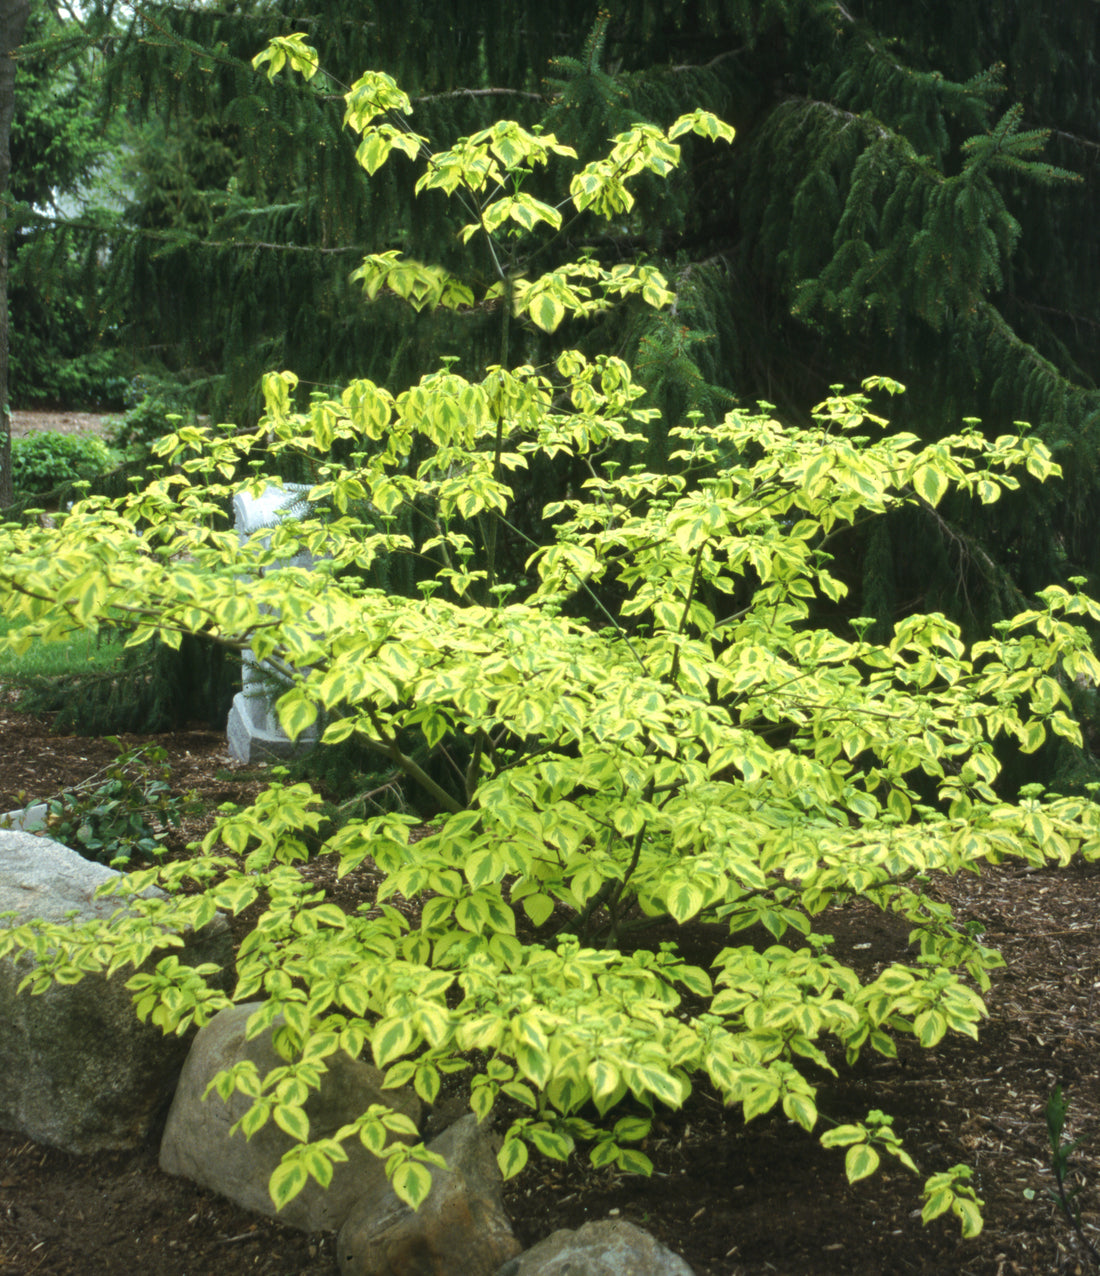 A young specimen of variegated Golden Shadows dogwood tree in a landscape